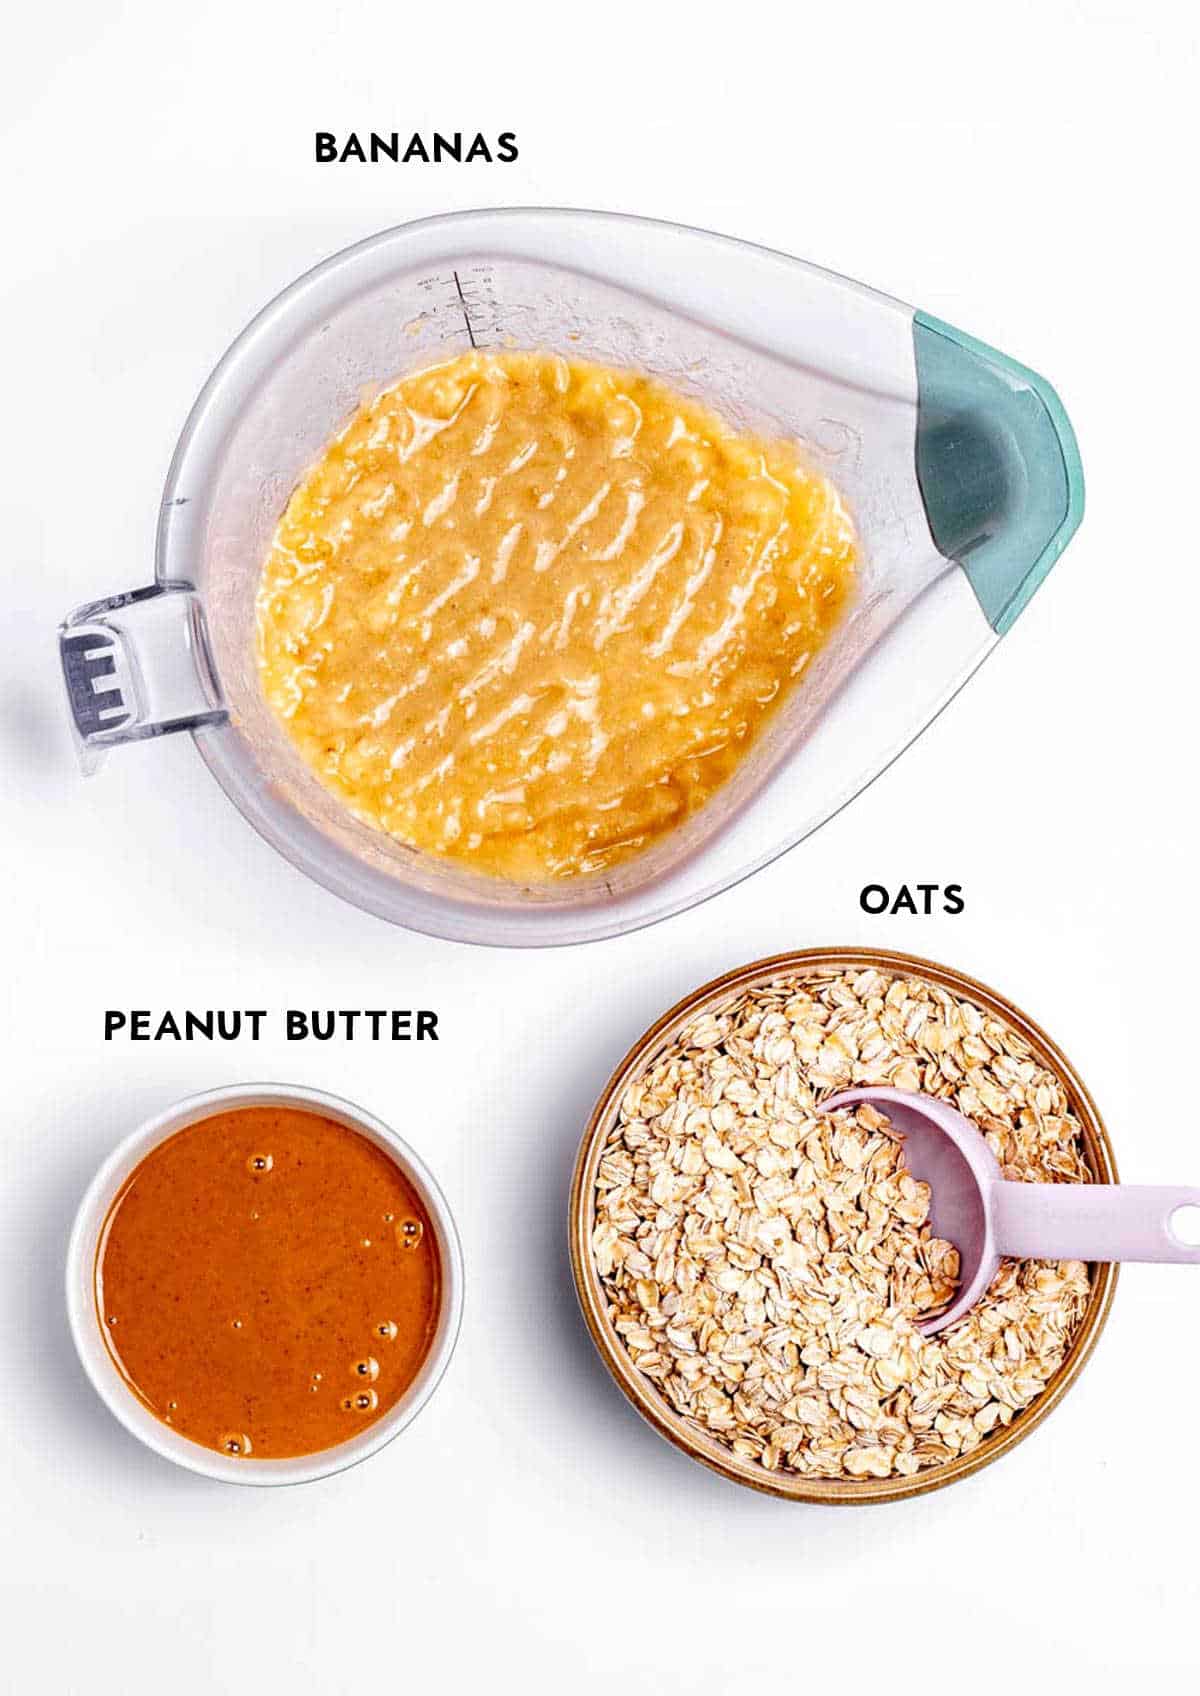 Ingredients required for 3-ingredient banana oatmeal bars recipe.